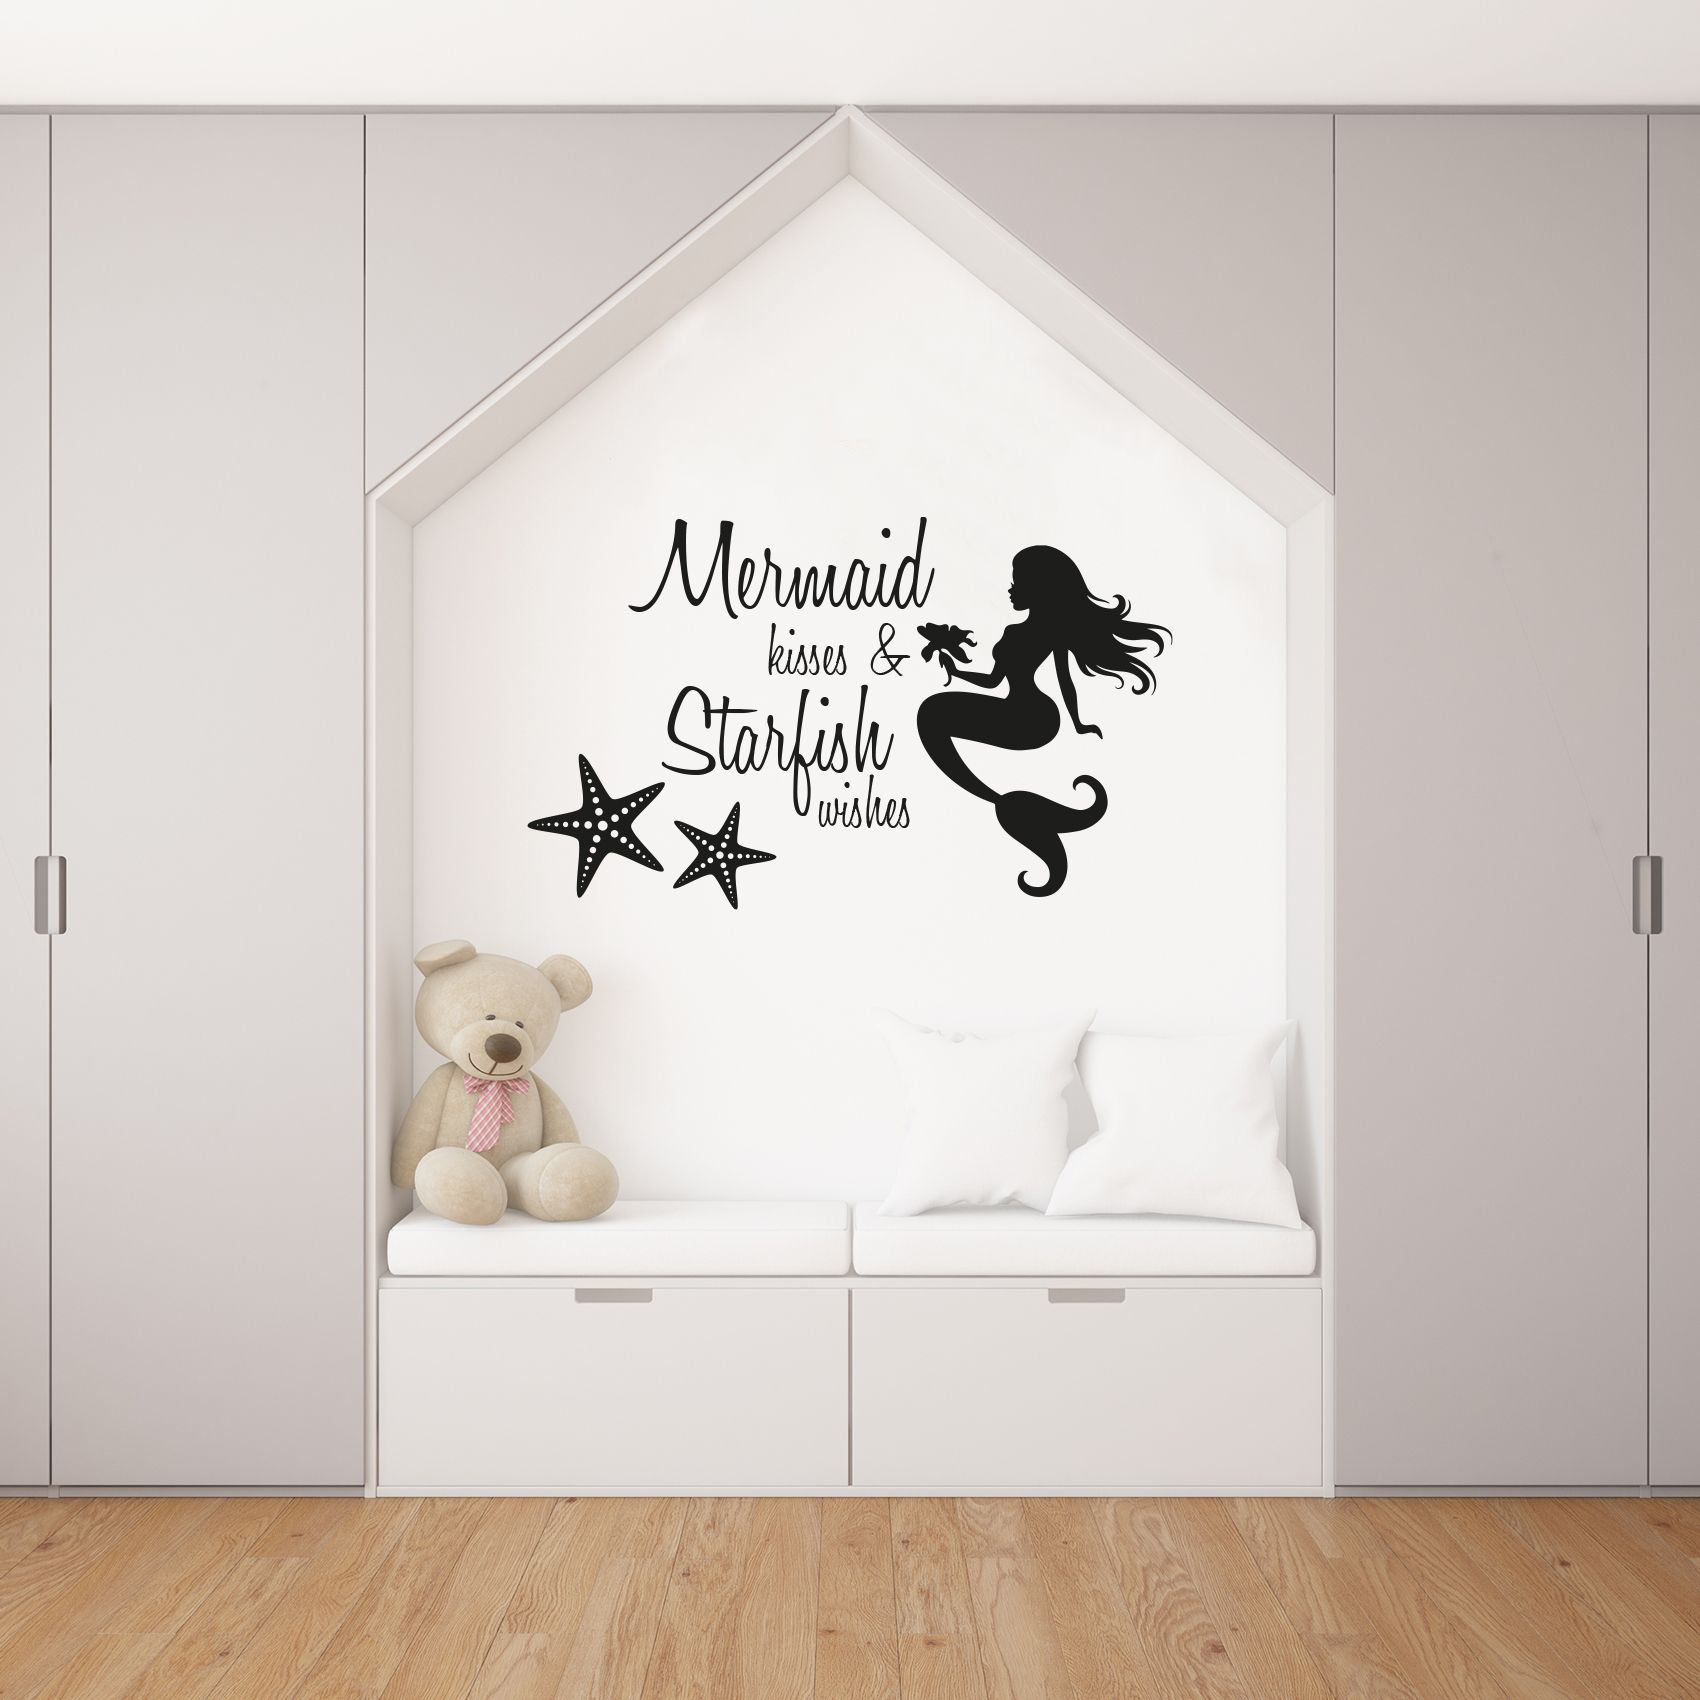 Mermaid Kisses And Starfish Wishes Inspirational Motivation Quote Mermaid Starfish Silhouette Vinyl Wall Art Wall Sticker Wall Decal Home Room Decoration Decal Kids Room Décor Size (10x10 inch) - image 1 of 3